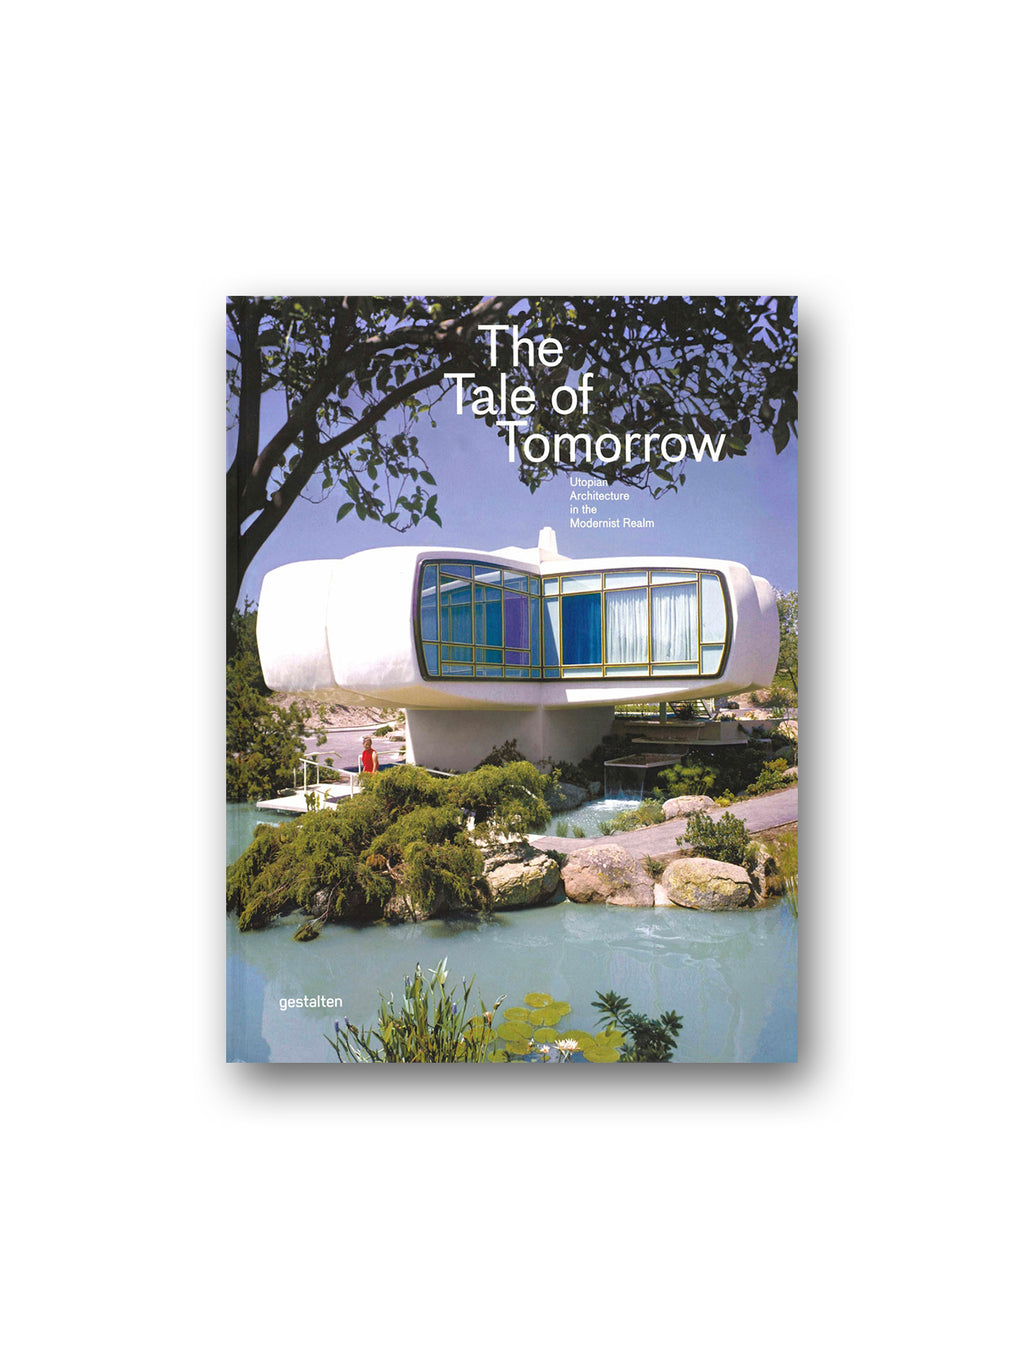 The Tale of Tomorrow : Utopian Architecture in the Modernist Realm